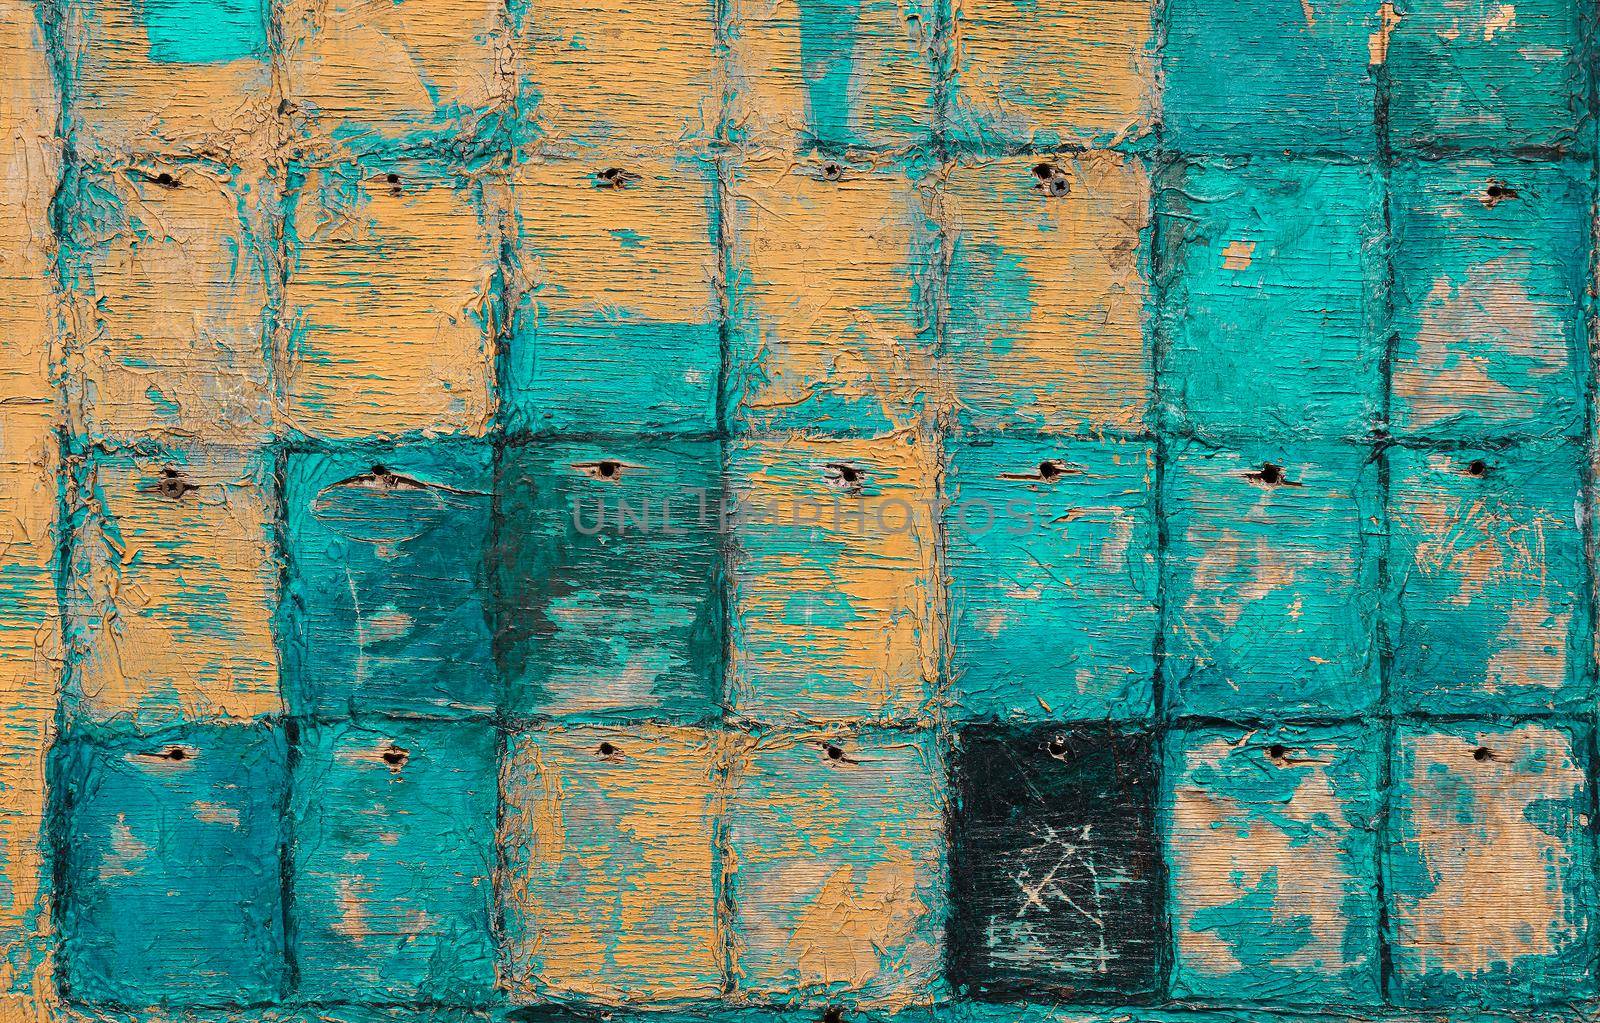 Abstract yellow and teal background by BreakingTheWalls